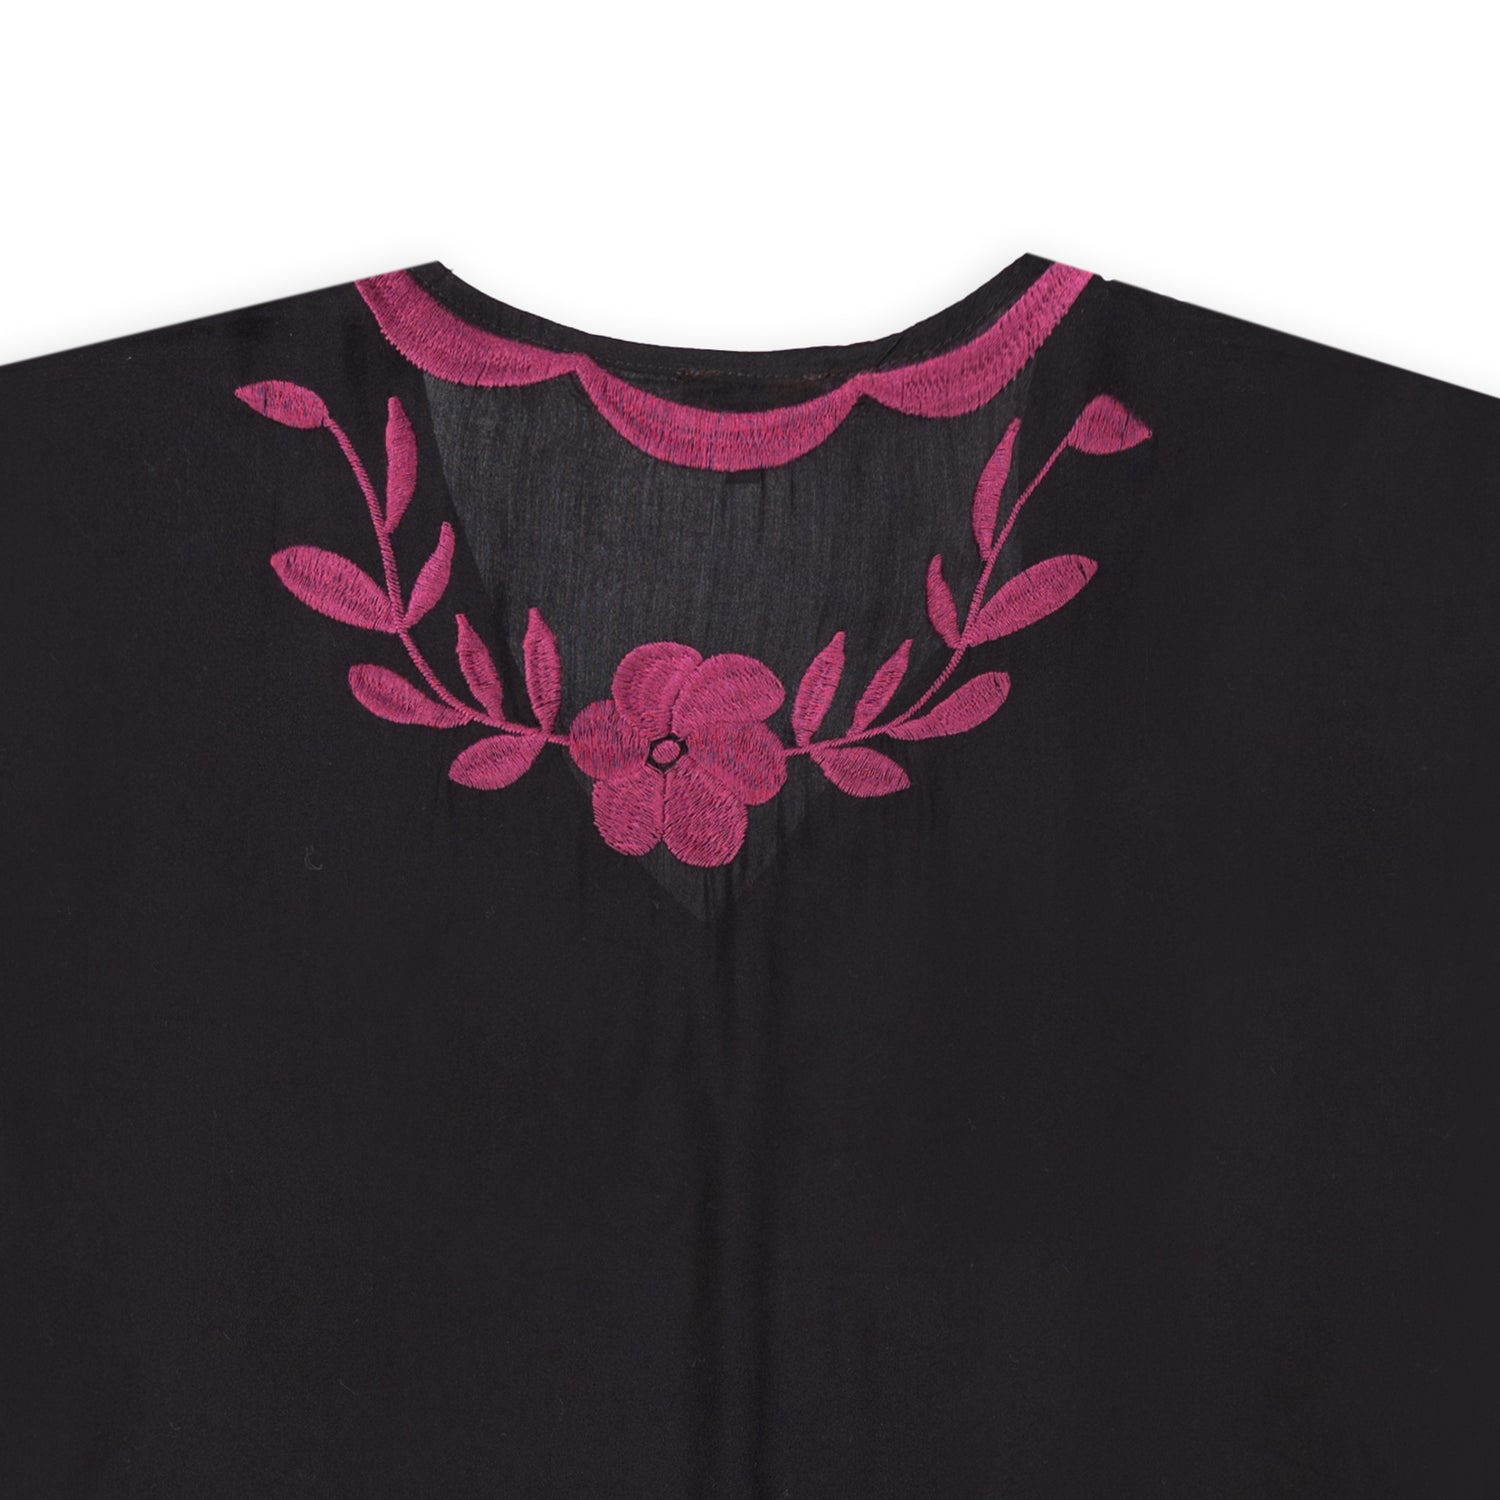 Black and Maroon Embroidered Poncho Top